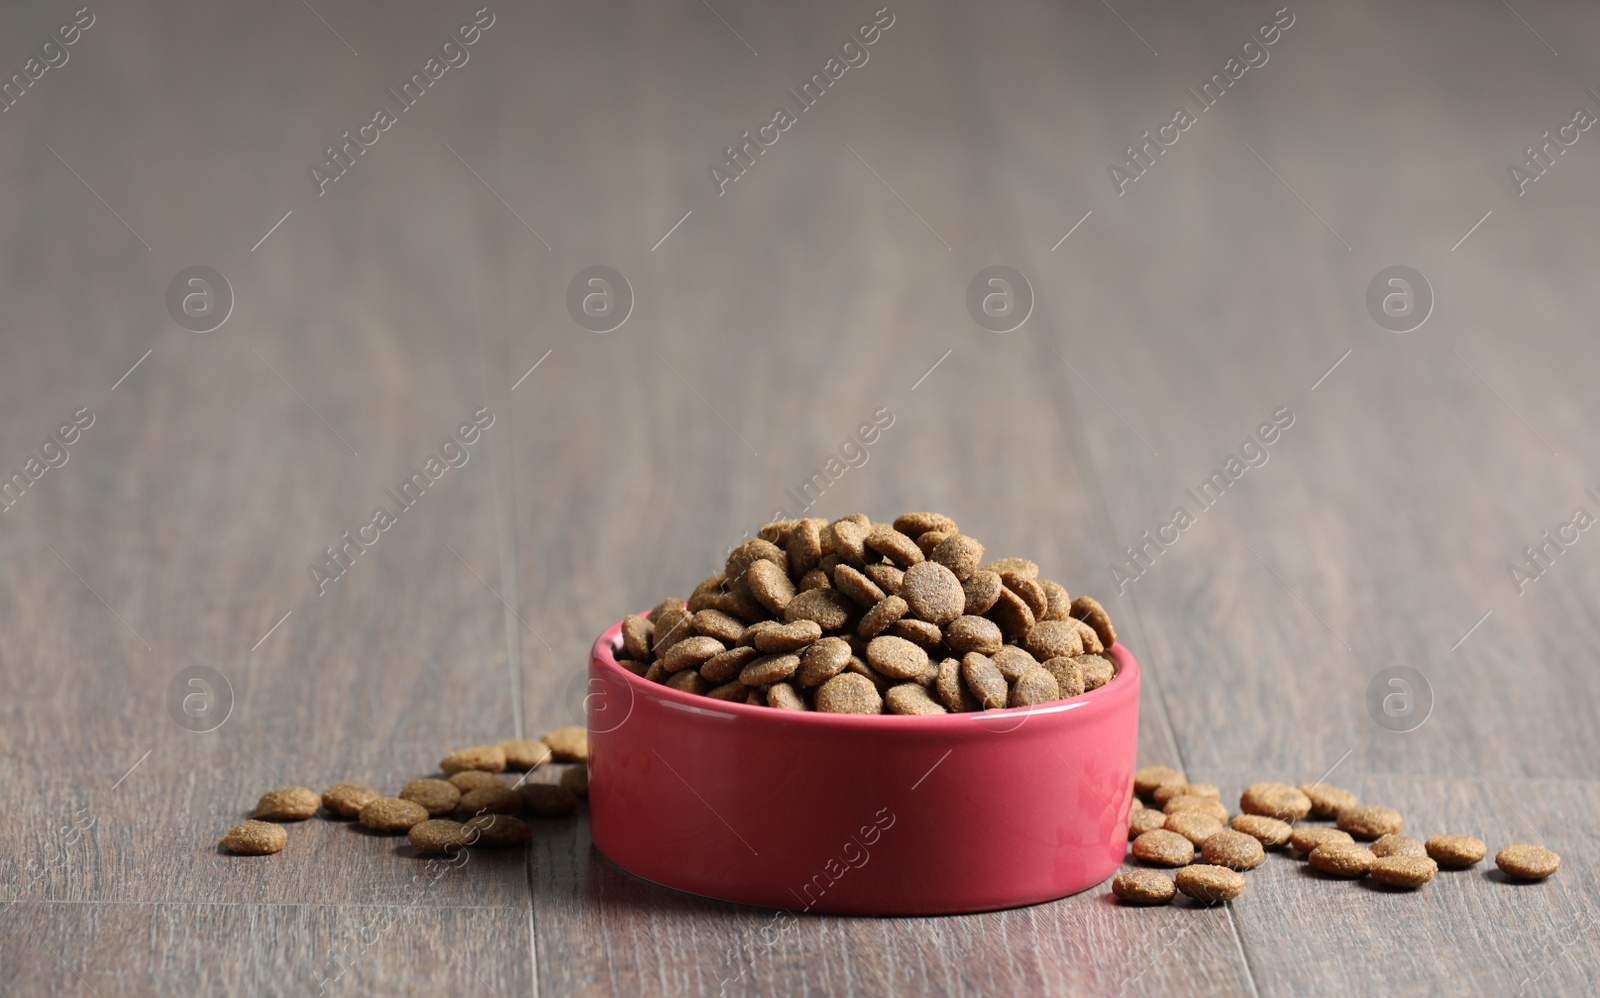 Photo of Bowl with dry dog food on wooden floor indoors